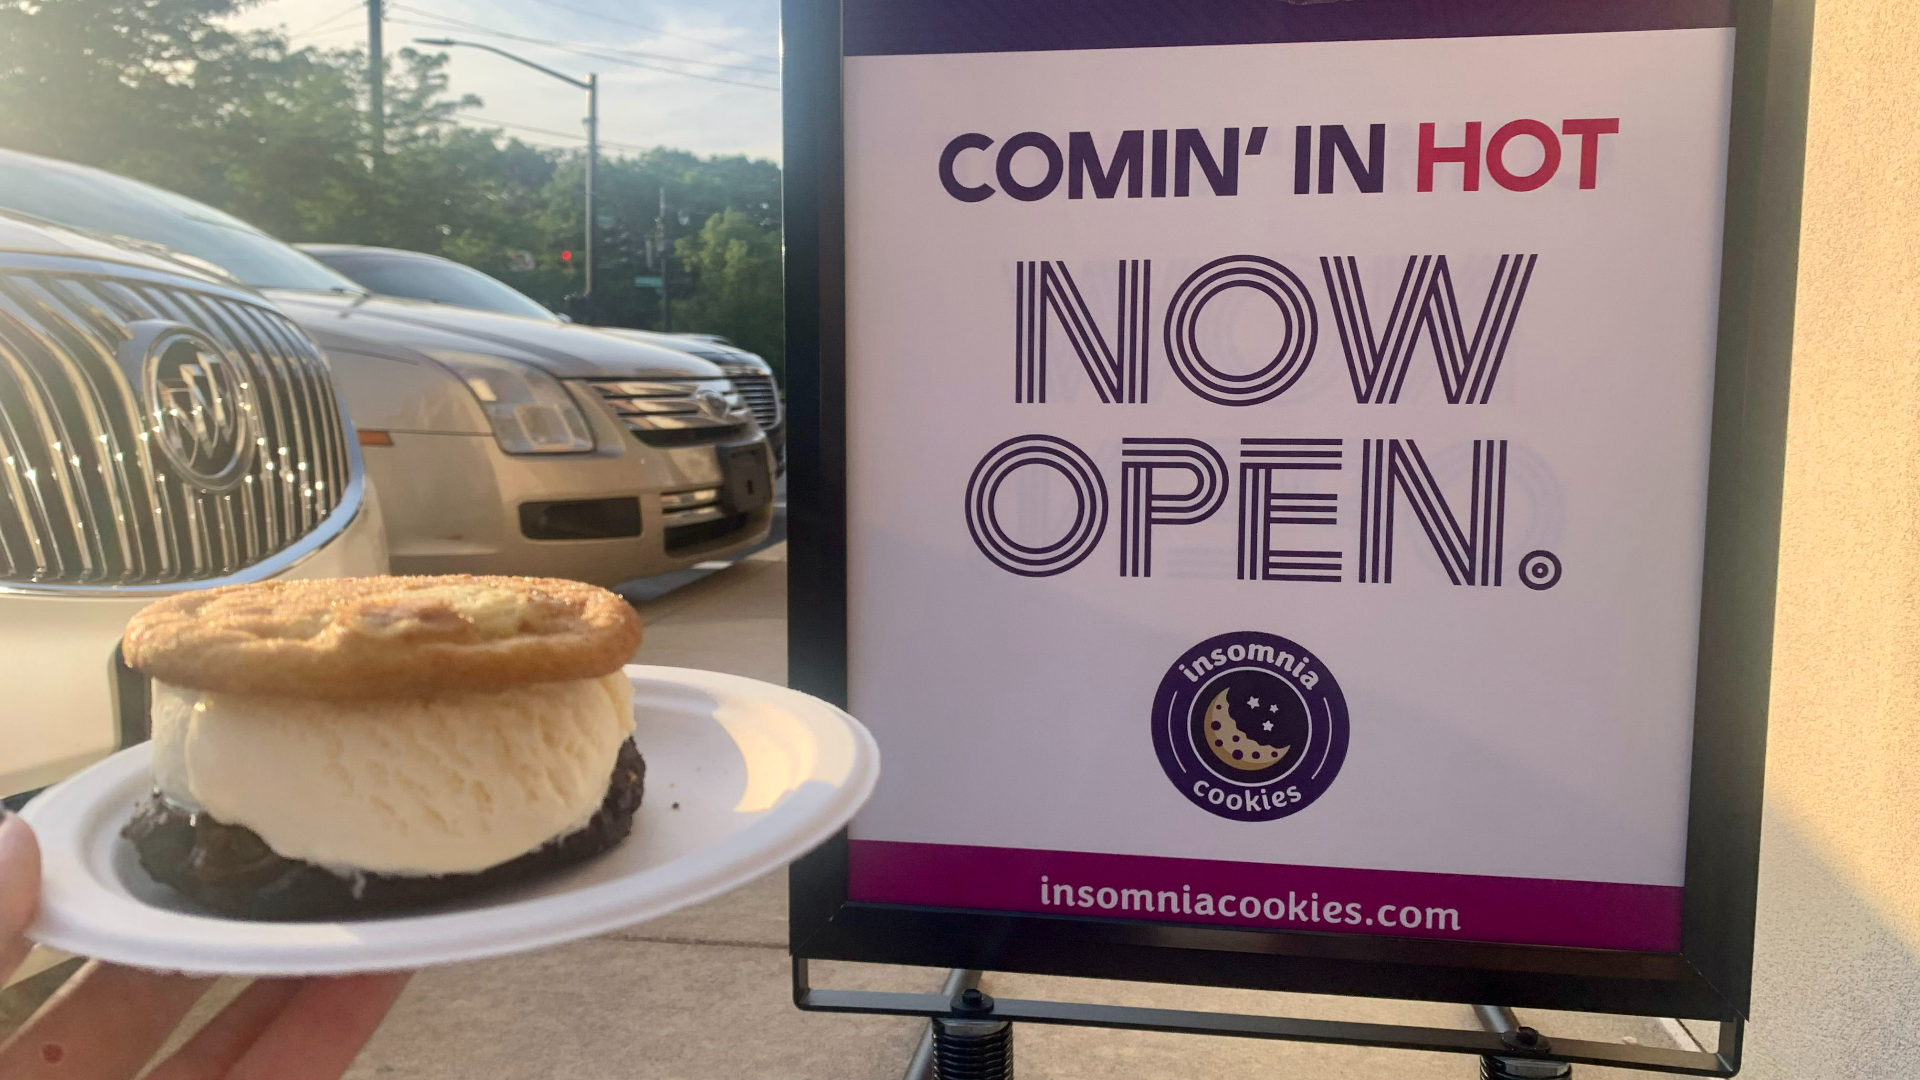 Insomnia Cookies, a bakery known for delivering warm cookies all day and late into the night, has opened its first Dayton-area location.